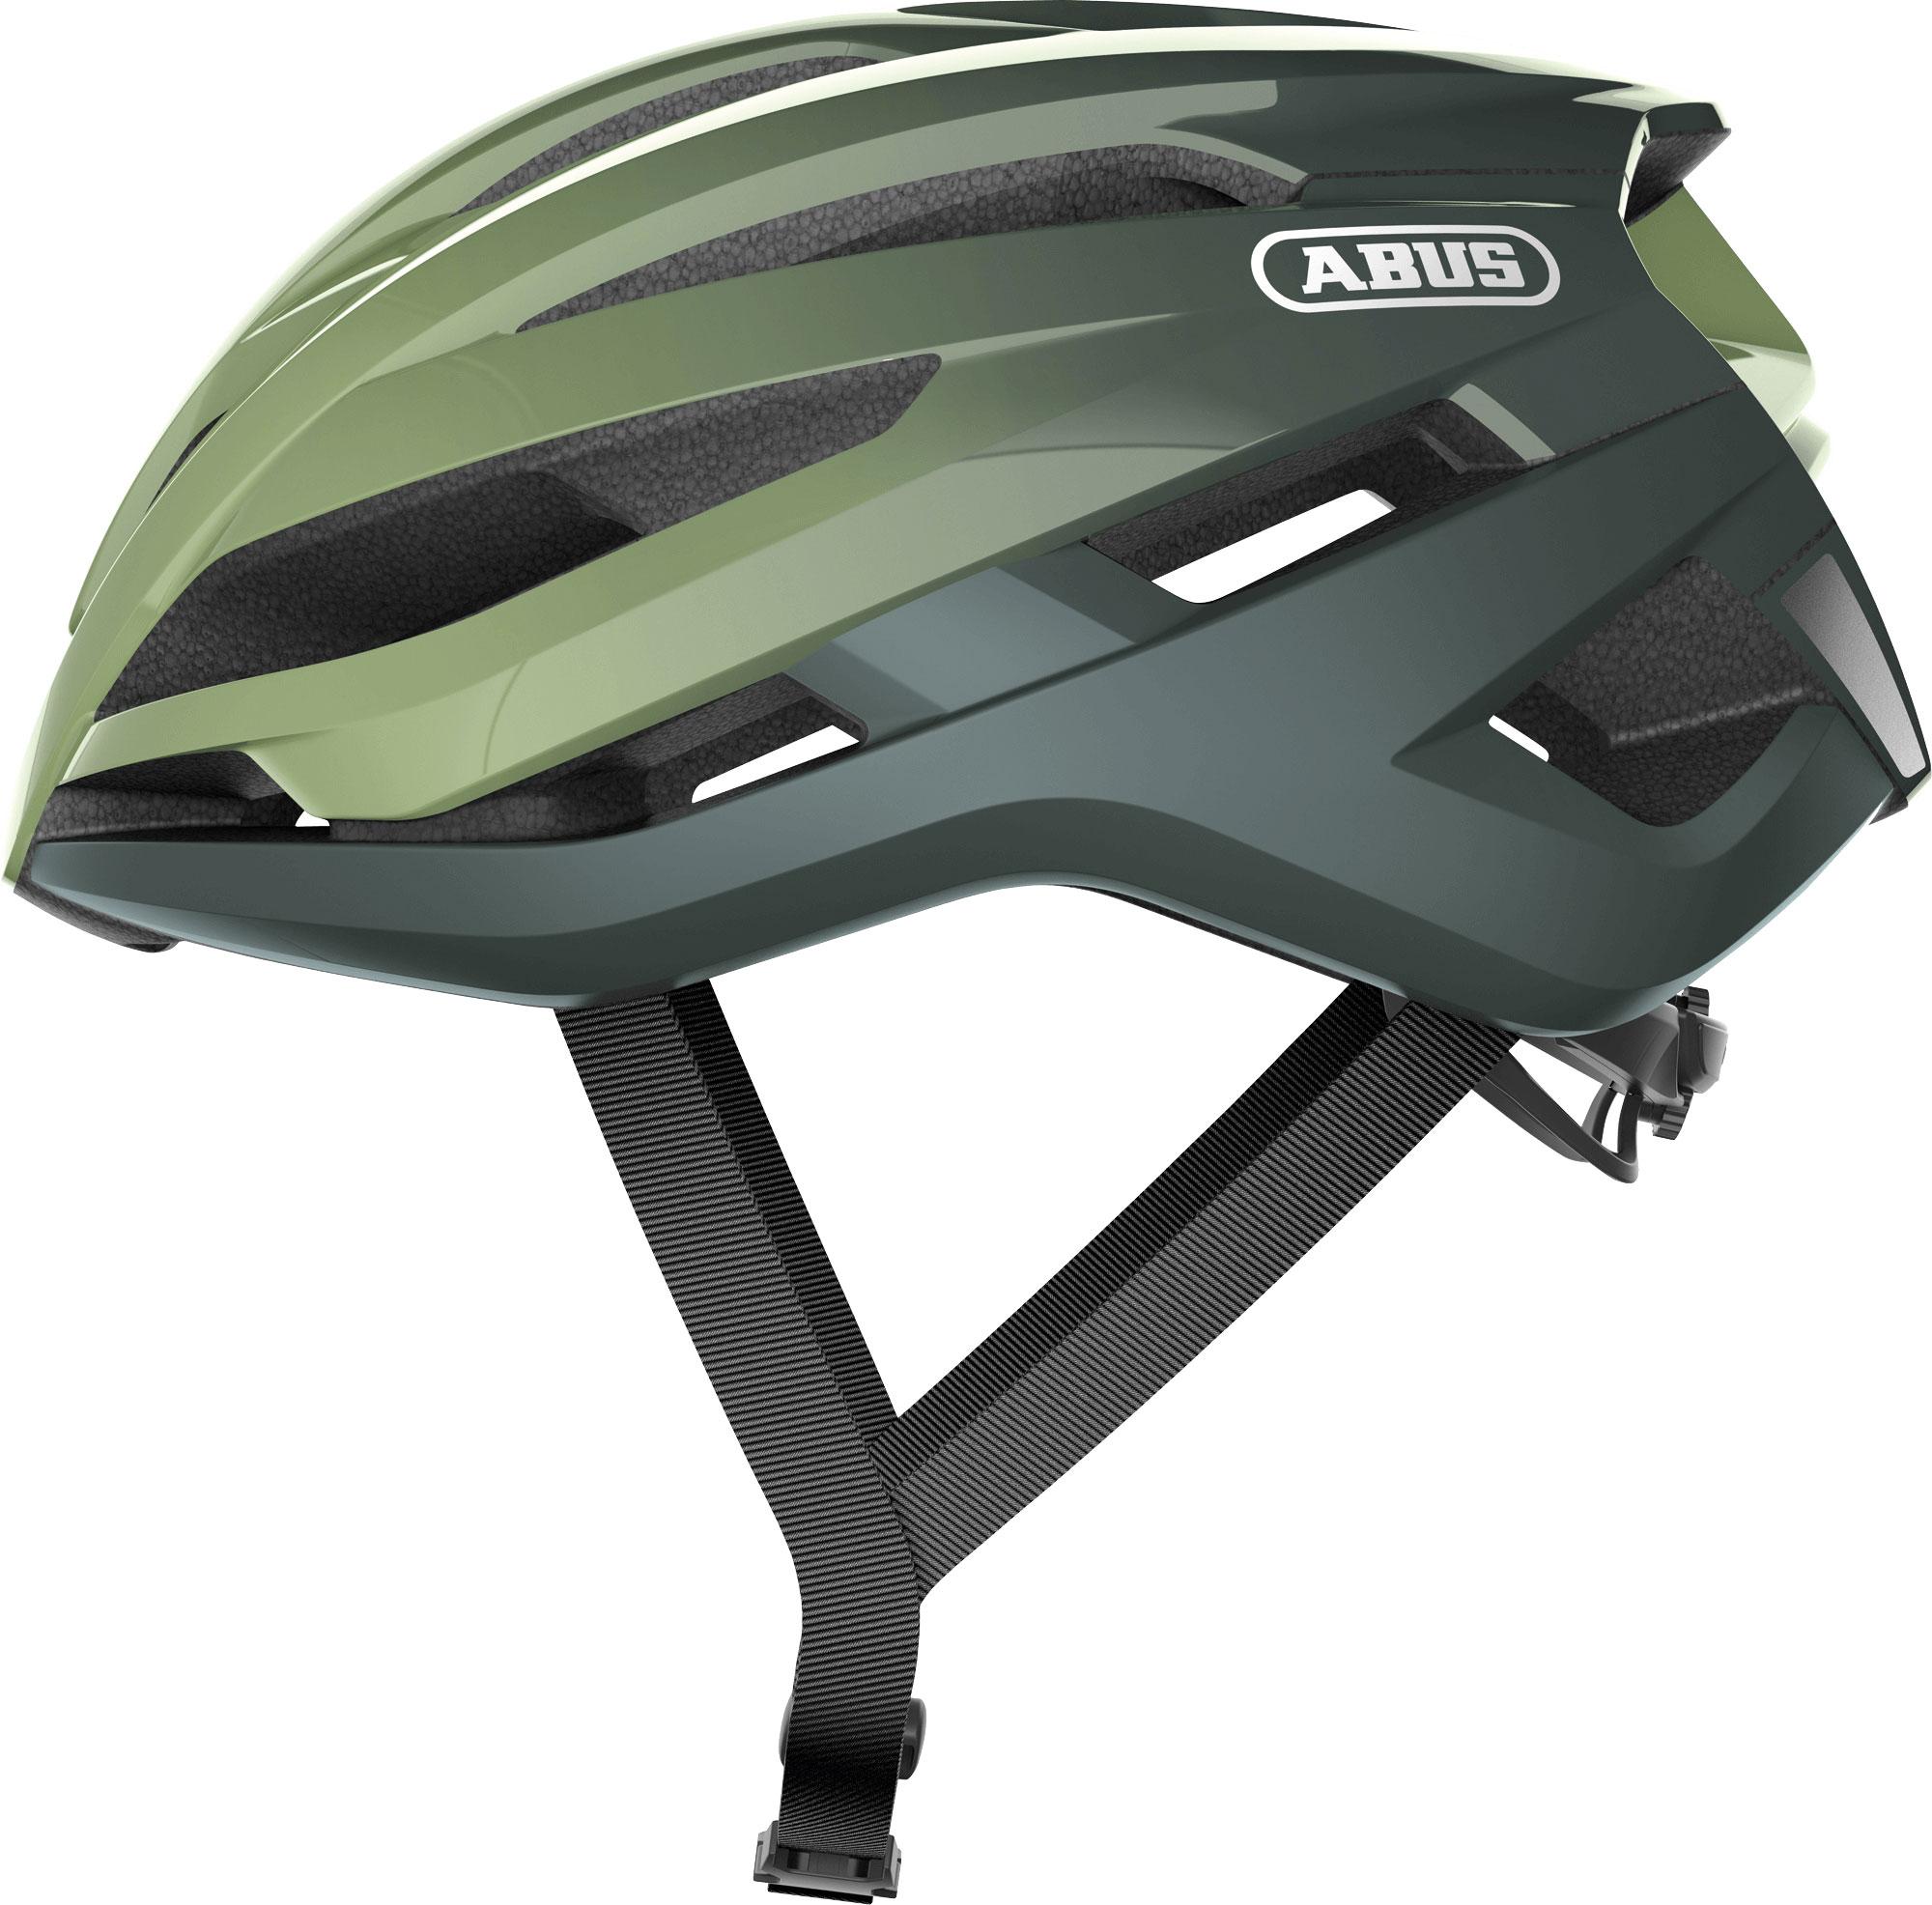 Abus Storm Chaser Road Cycling Helmet - Opal Green